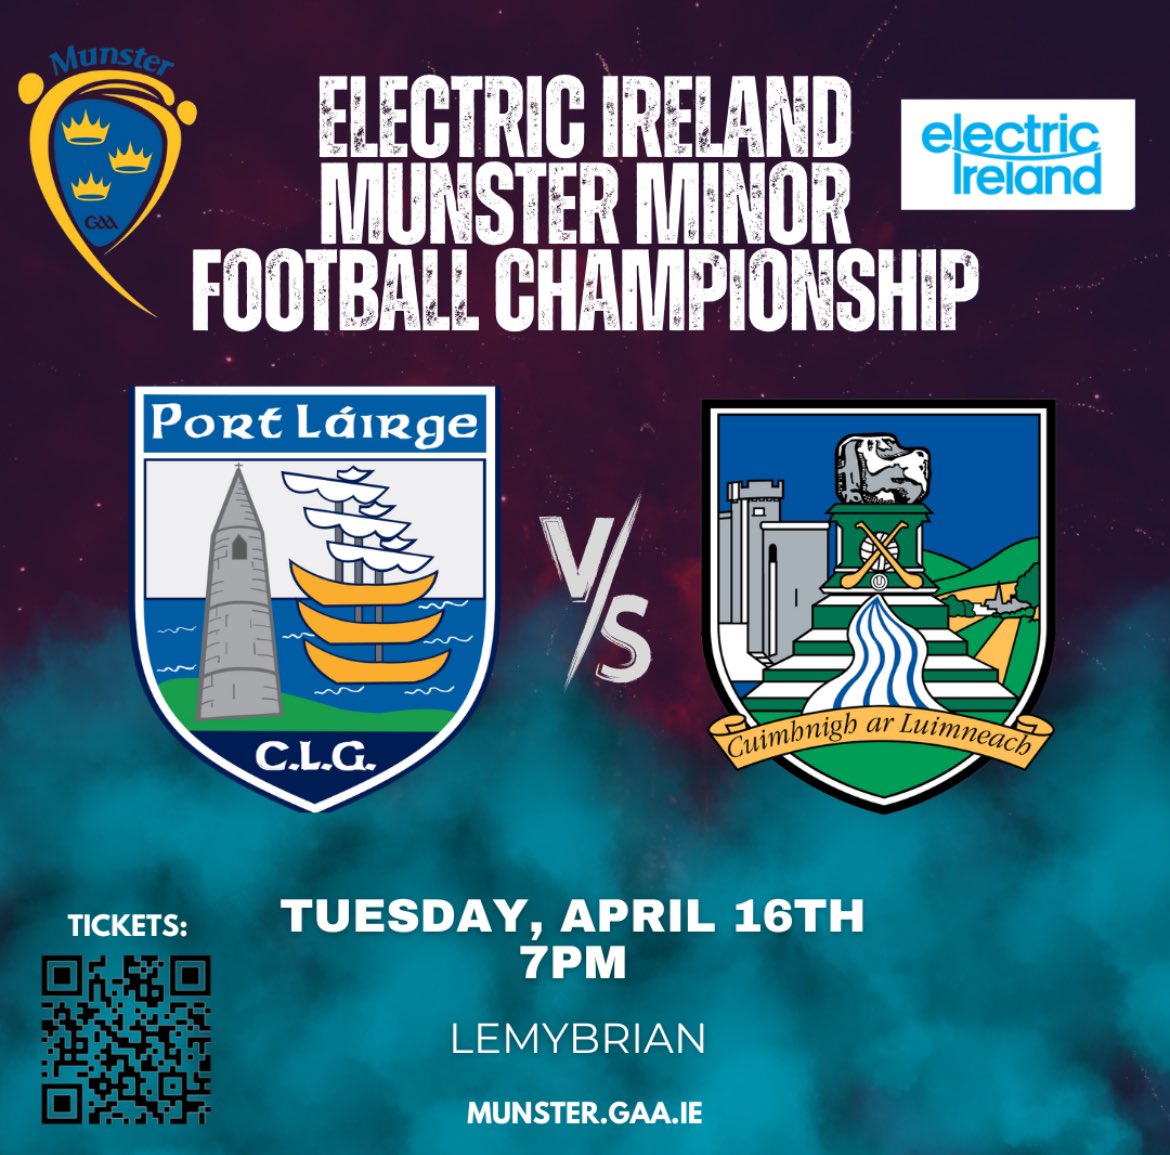 Munster GAA Electric Ireland Minor Football Championship Waterford v Limerick Tuesday 16th of April at 7pm @KilrossantyGAA, Lemybrien Tickets: universe.com/events/munster…